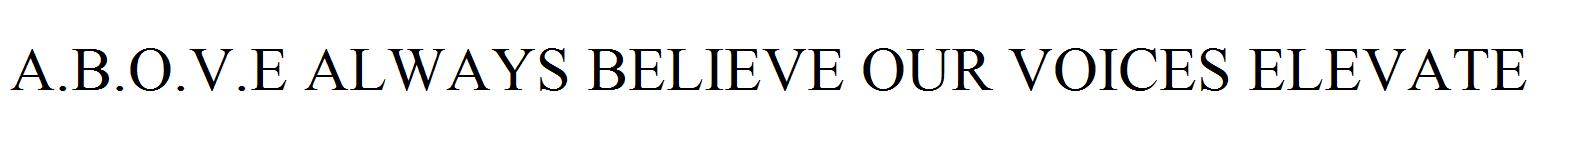 A.B.O.V.E ALWAYS BELIEVE OUR VOICES ELEVATE